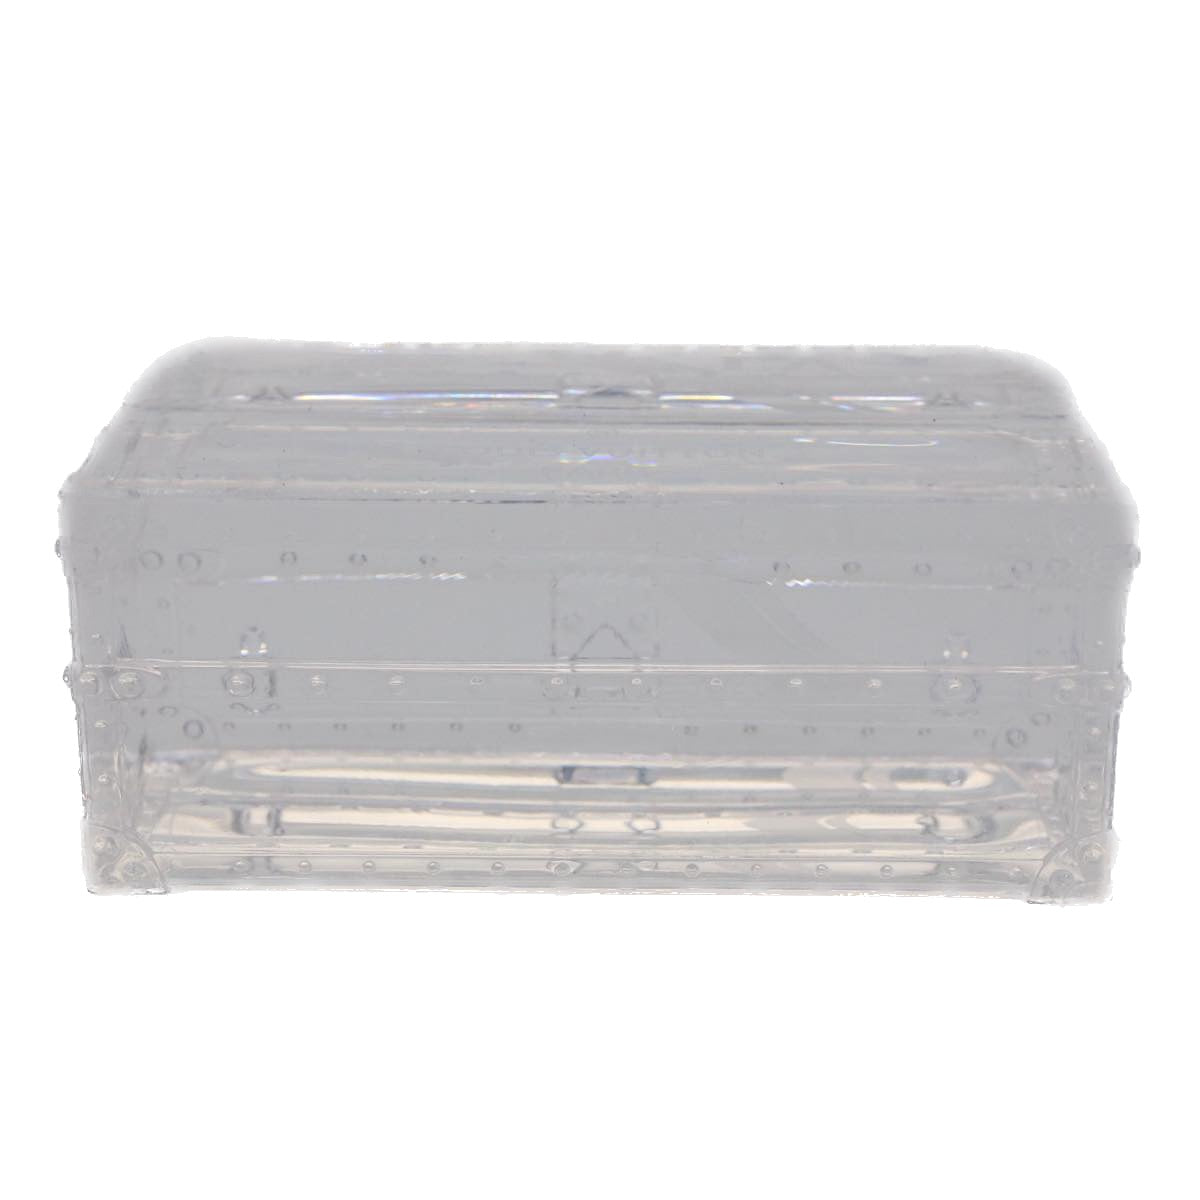 LOUIS VUITTON Paper Weight Clear LV Auth 51071 - 0